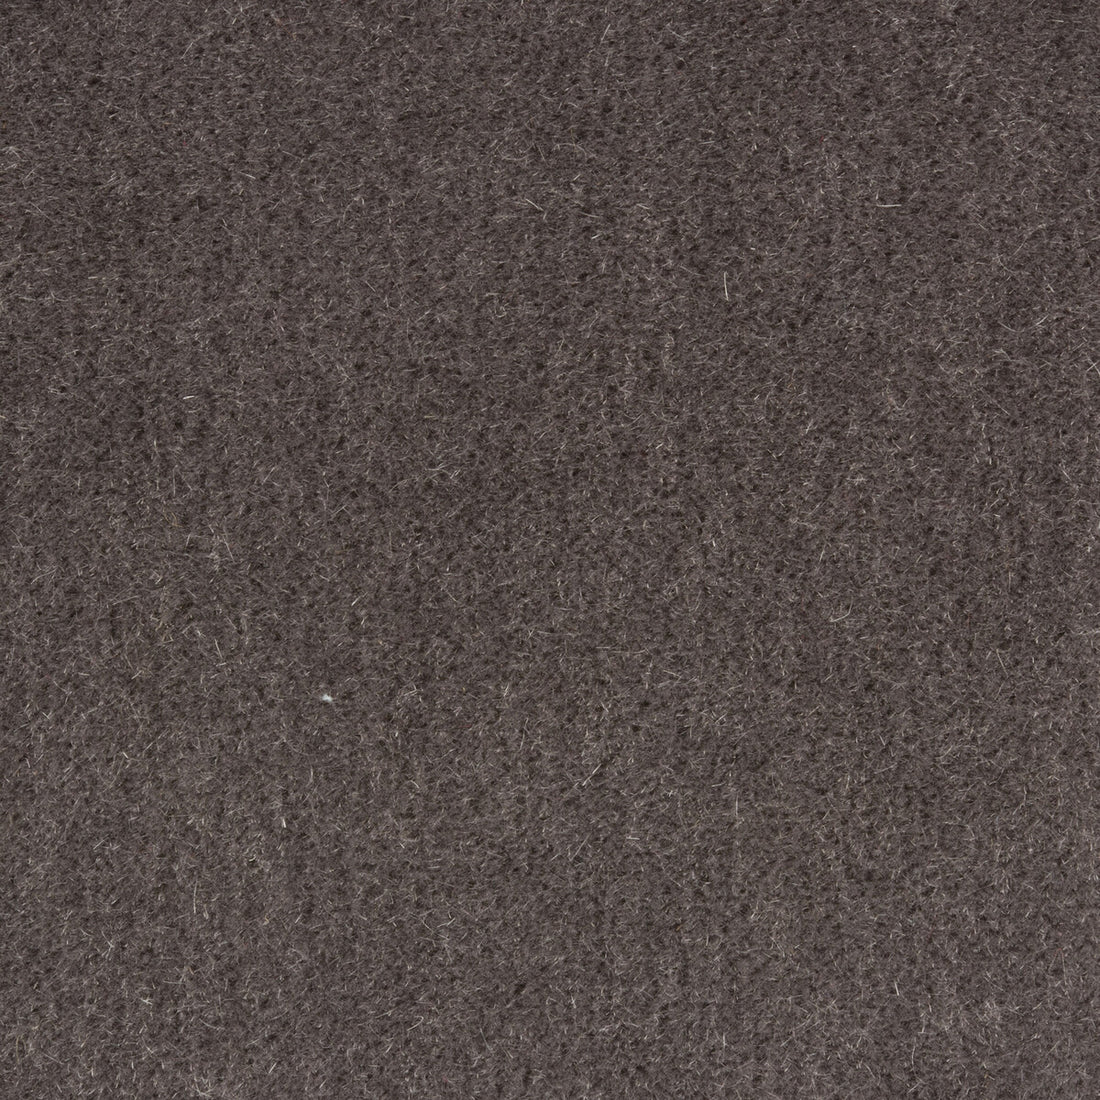 Bachelor Mohair fabric in storm grey color - pattern 8014101.21.0 - by Brunschwig &amp; Fils